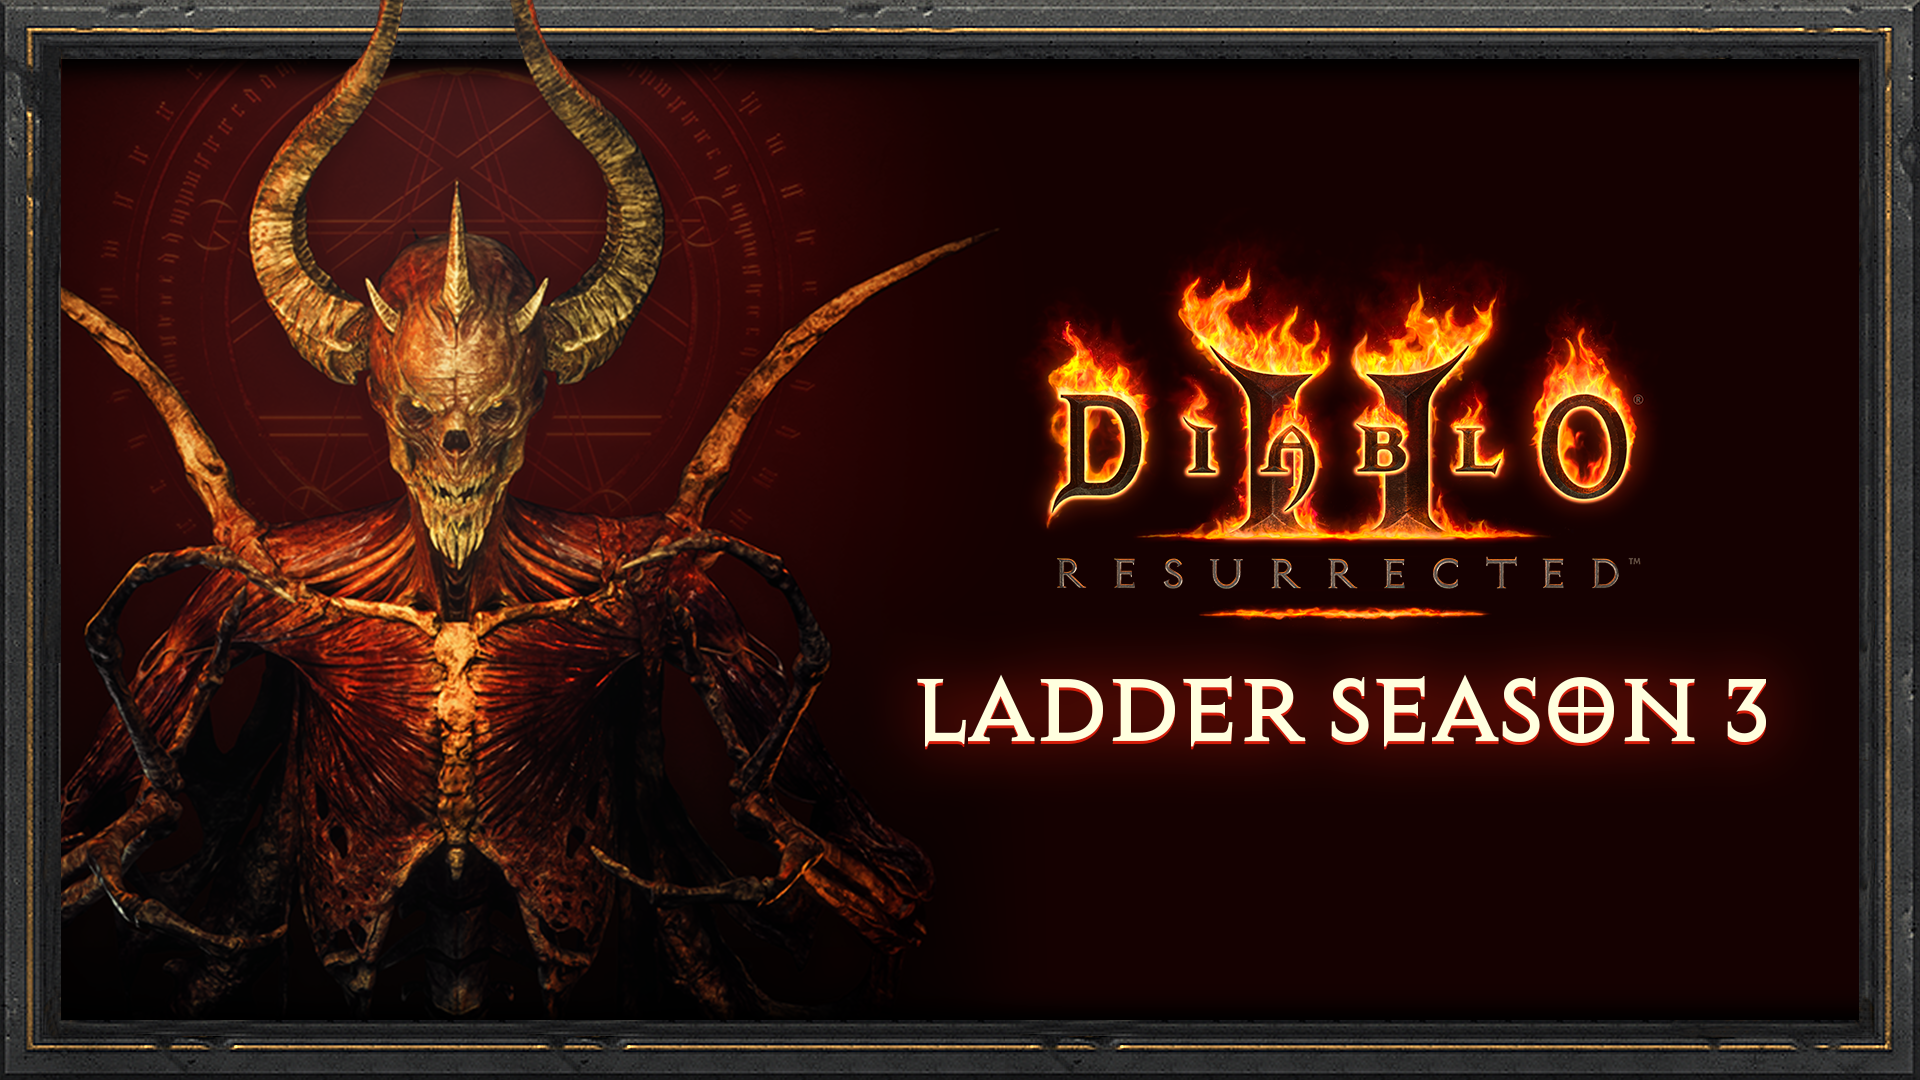 Diablo II Resurrected announces date and news for its 3rd season